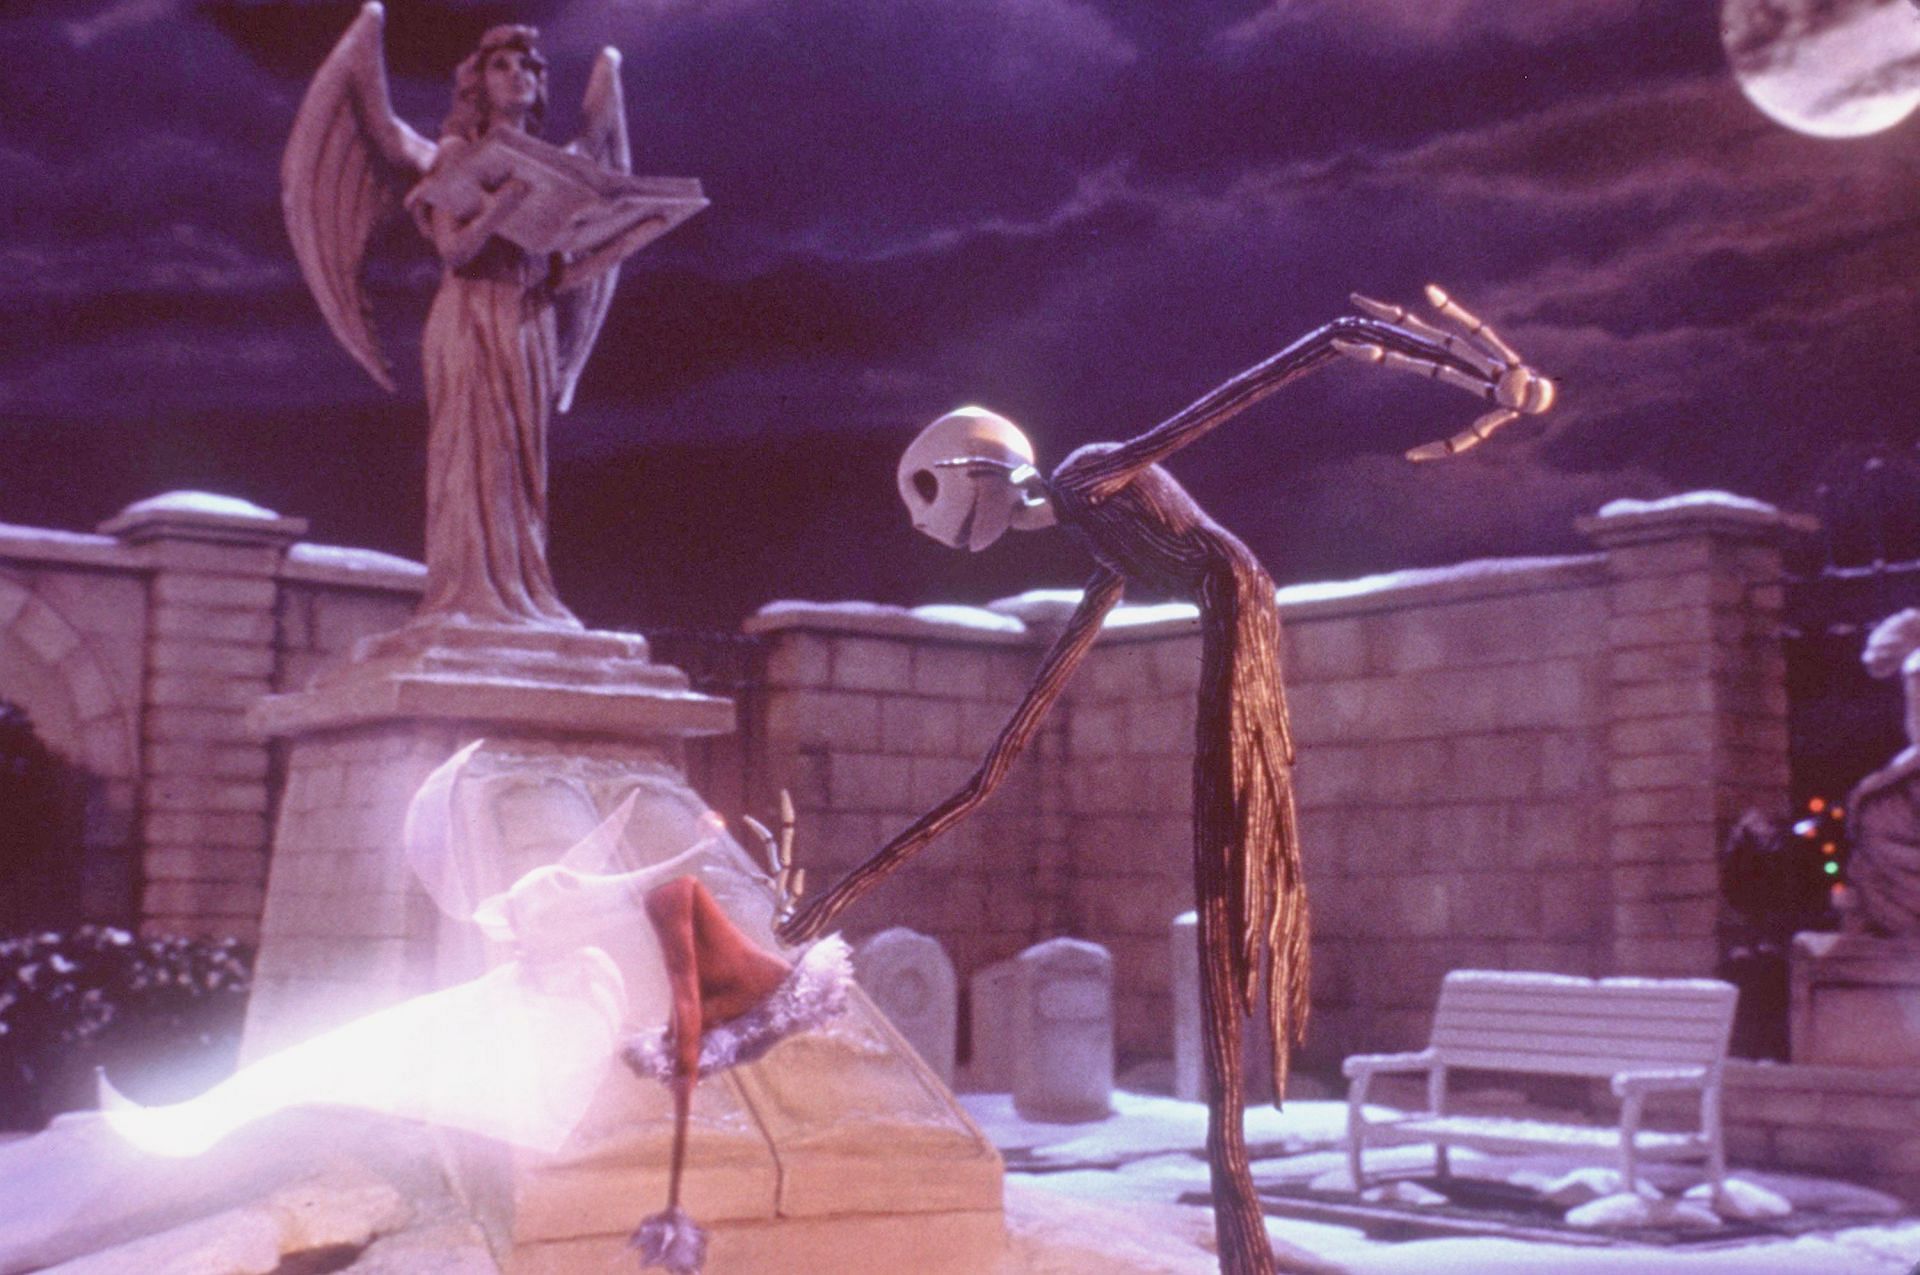  A still from The Nightmare Before Christmas (image via Touchstone Pictures)